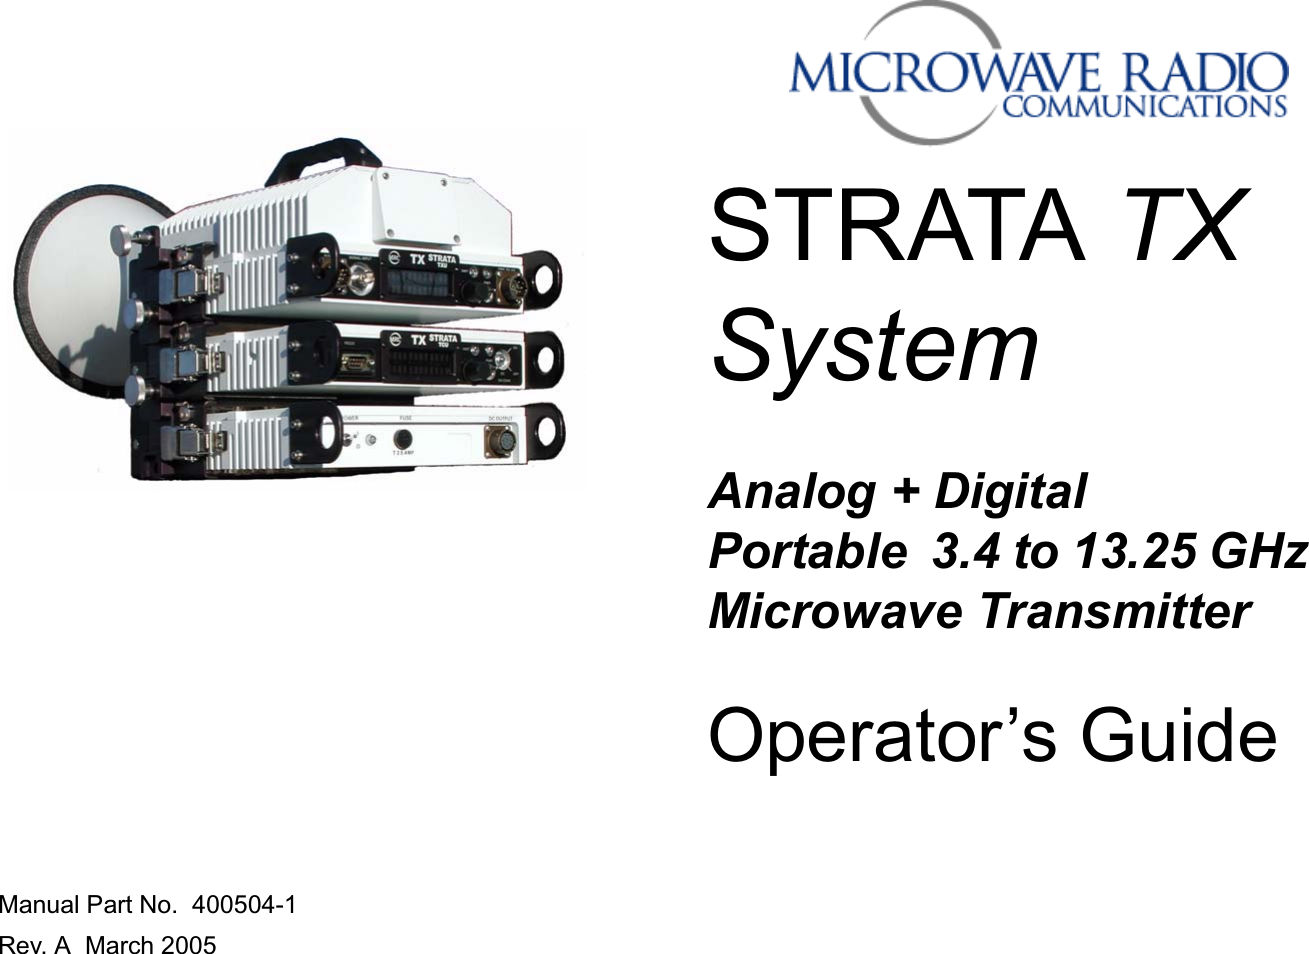 STRATA TX SystemManual Part No.  400504-1Rev. A  March 2005Operator’s GuideAnalog + Digital  Portable  3.4 to 13.25 GHz Microwave Transmitter 